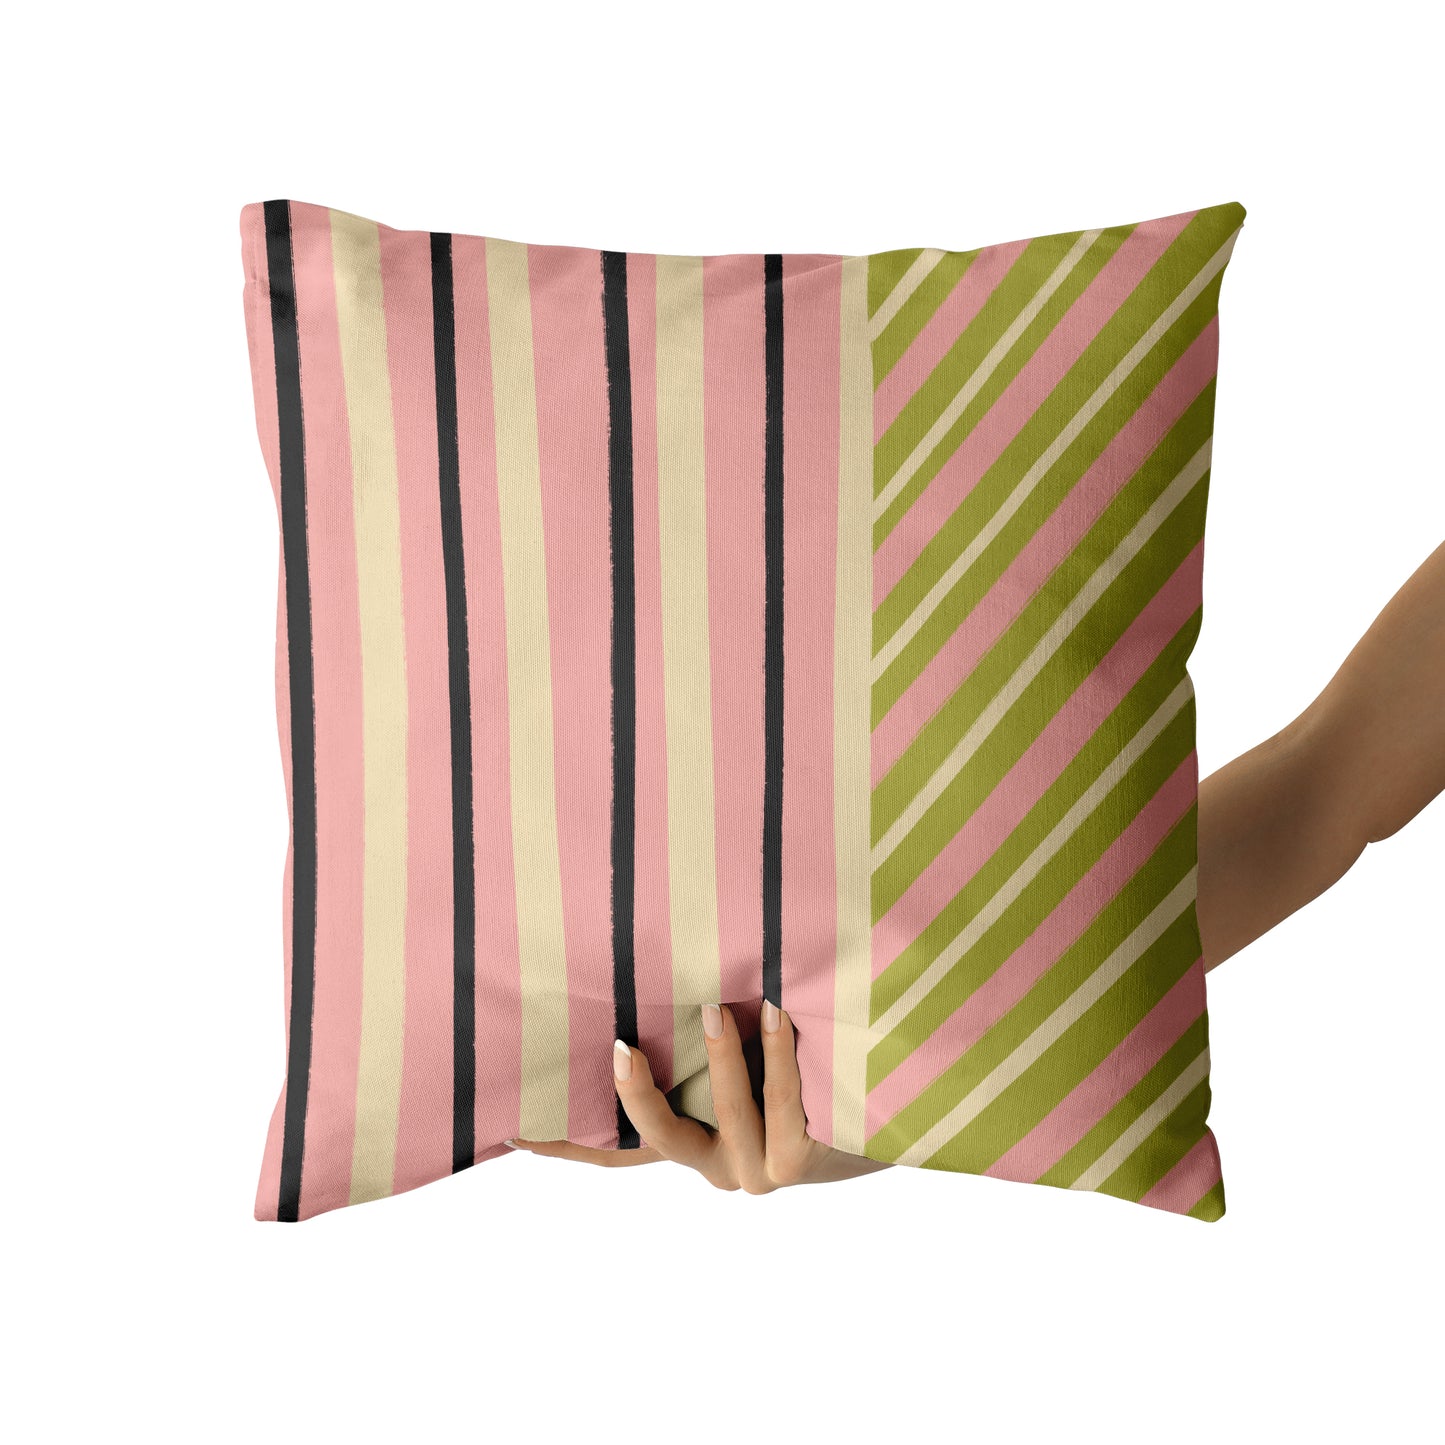 Striped Geometric Shapes Throw Pillow